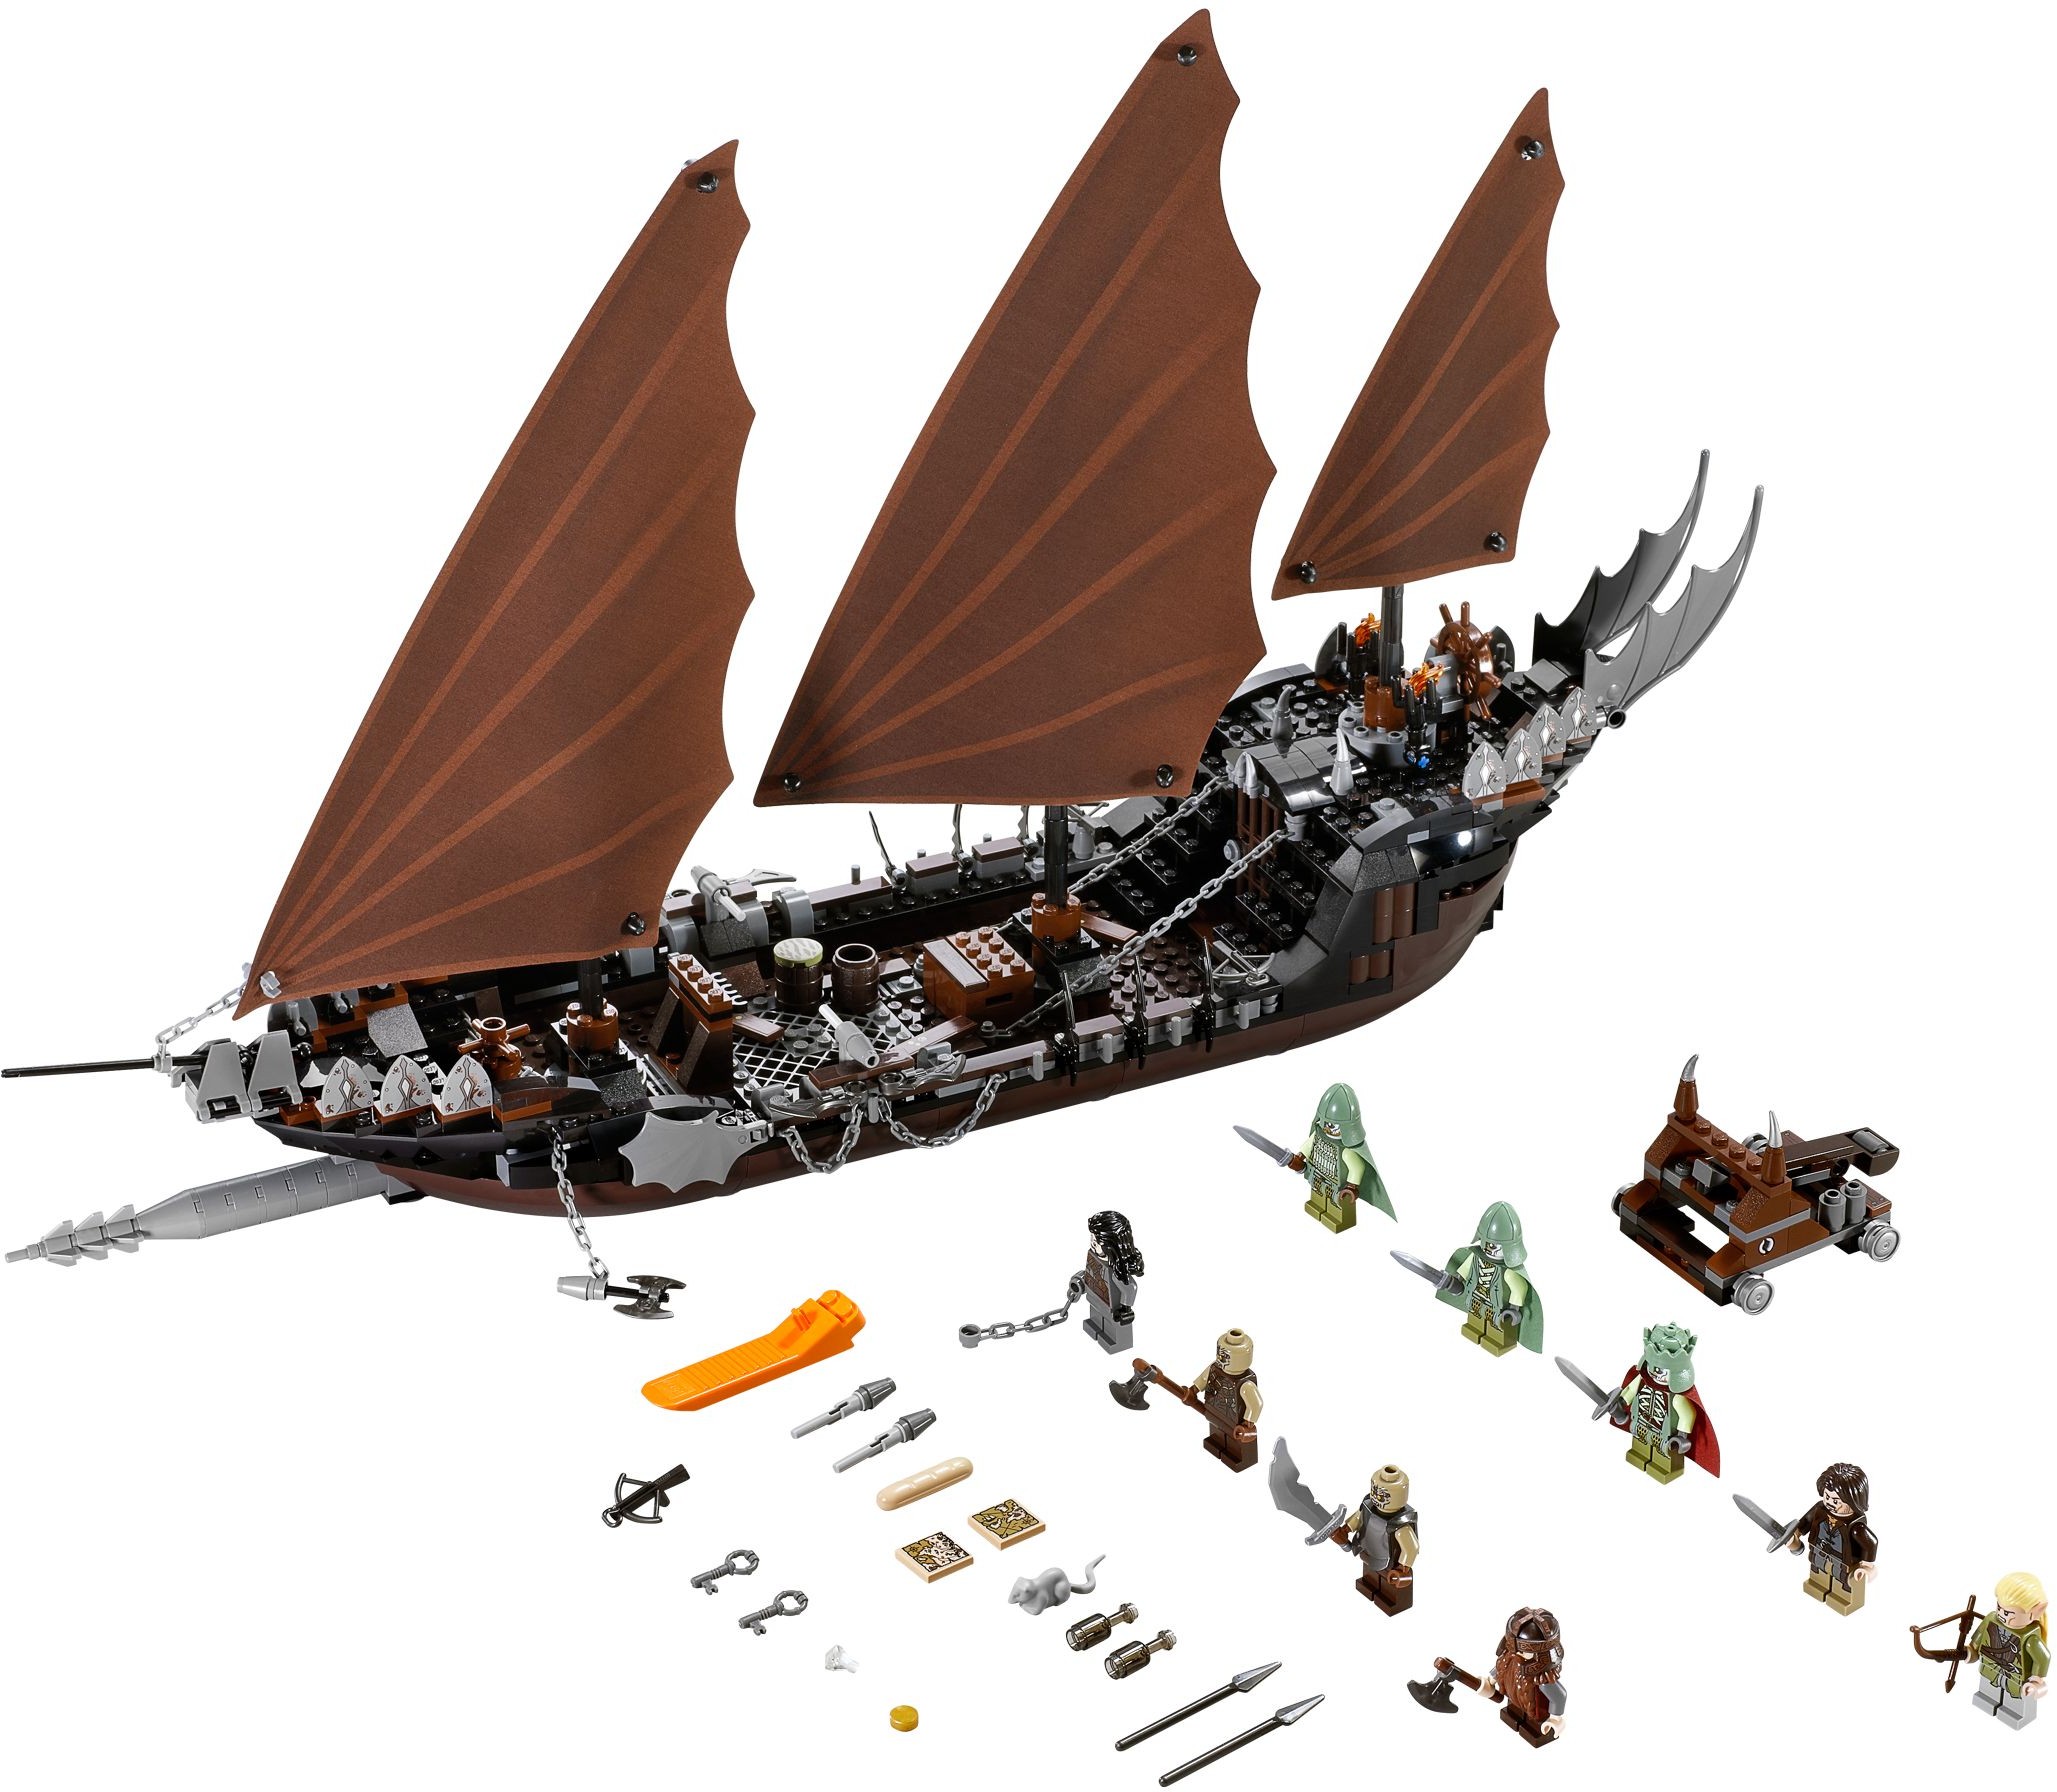 The five most valuable LEGO The Lord of the Rings and The Hobbit sets